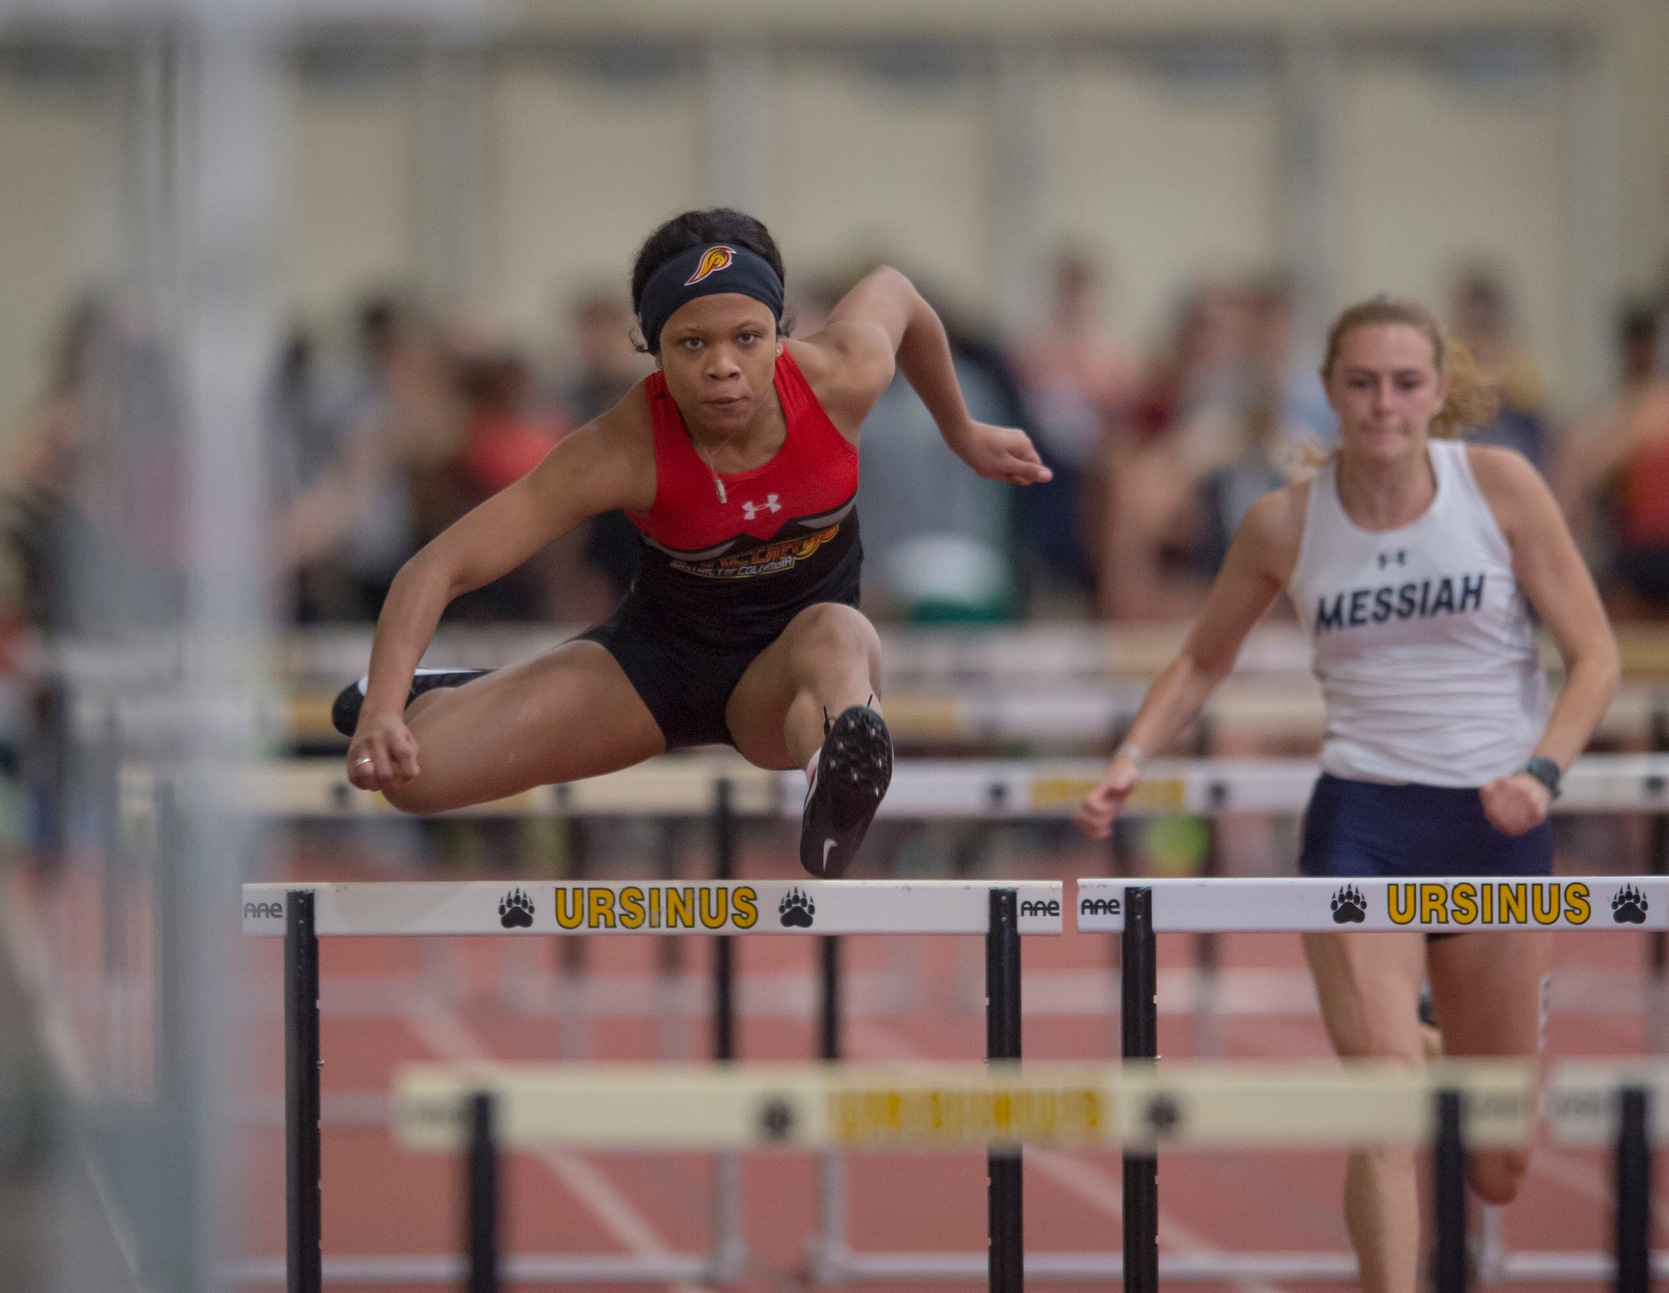 Shanise won the 60m hurdles with a season best time of 9.12s.